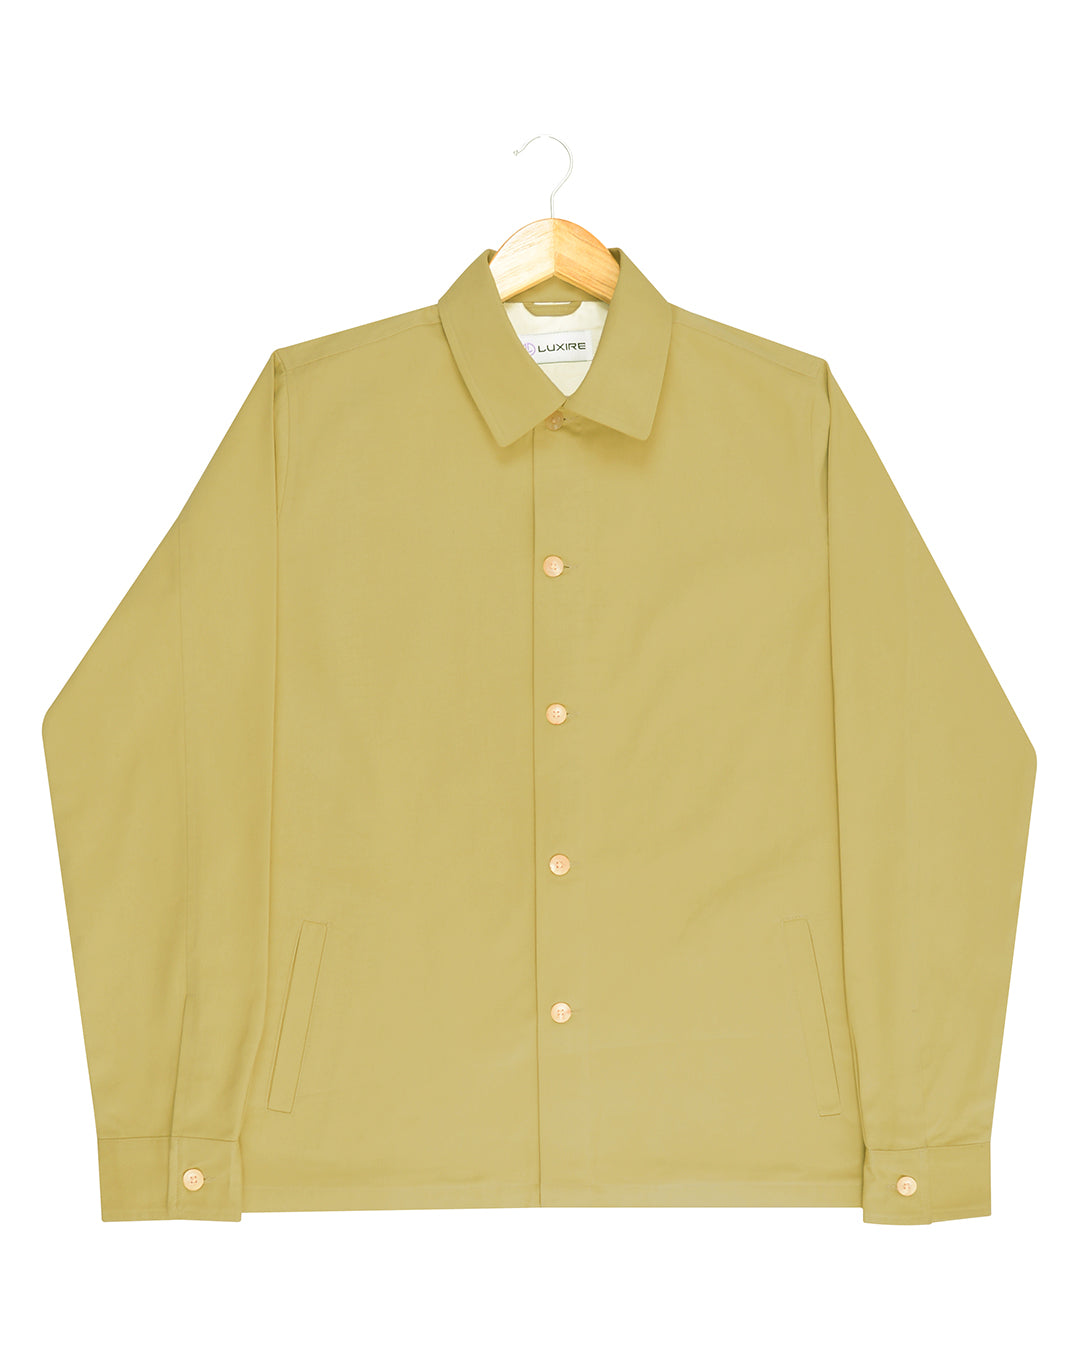 Front of the twill shirt jacket for men by Luxire in mellow mustard